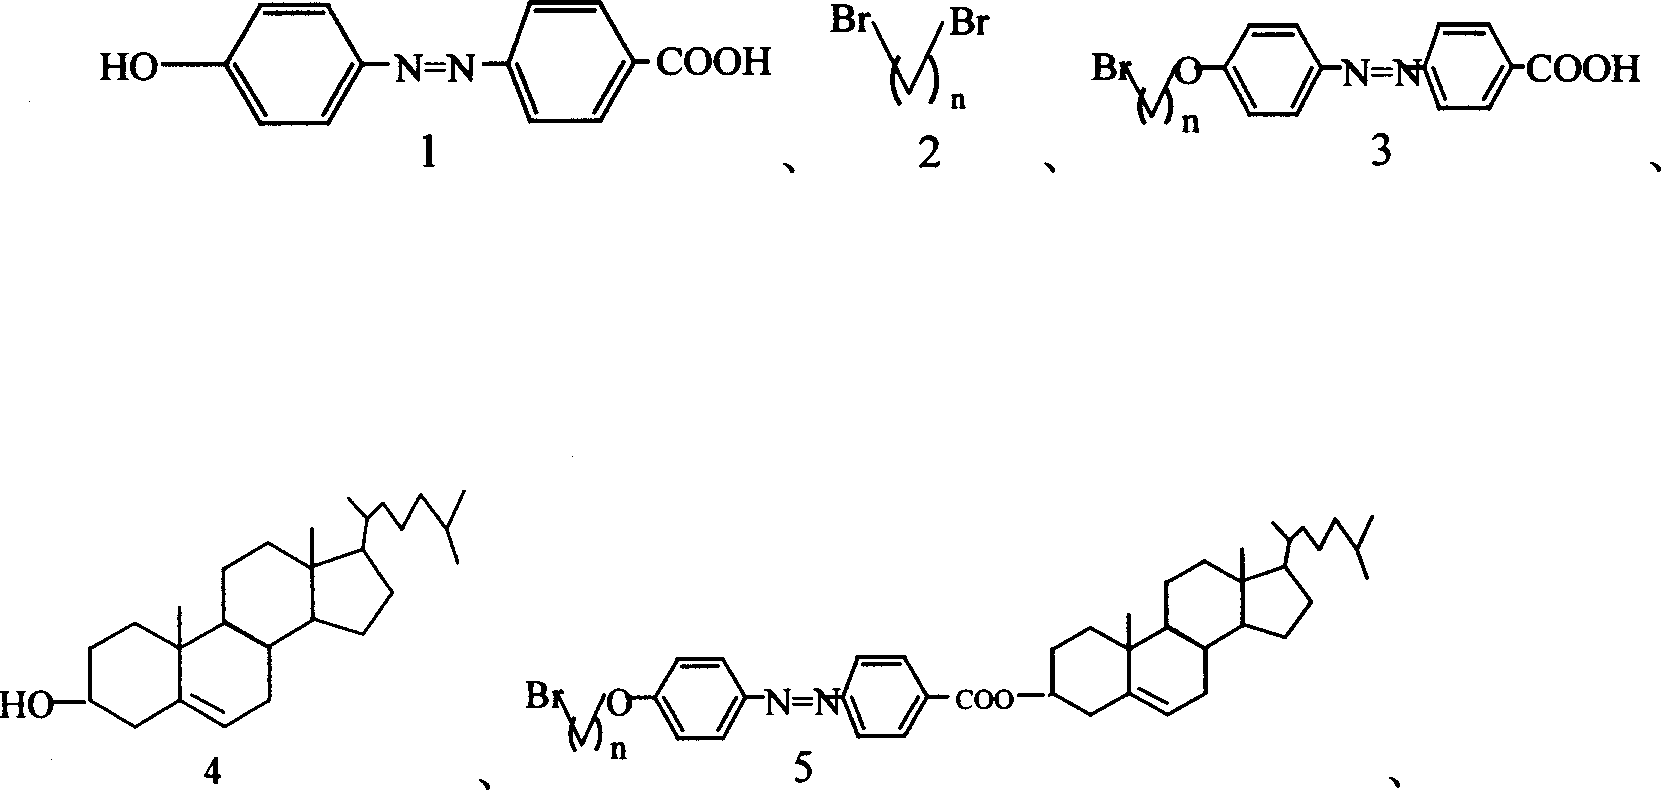 Cholesterin derivative containing azobenzol group and its synthesis and use